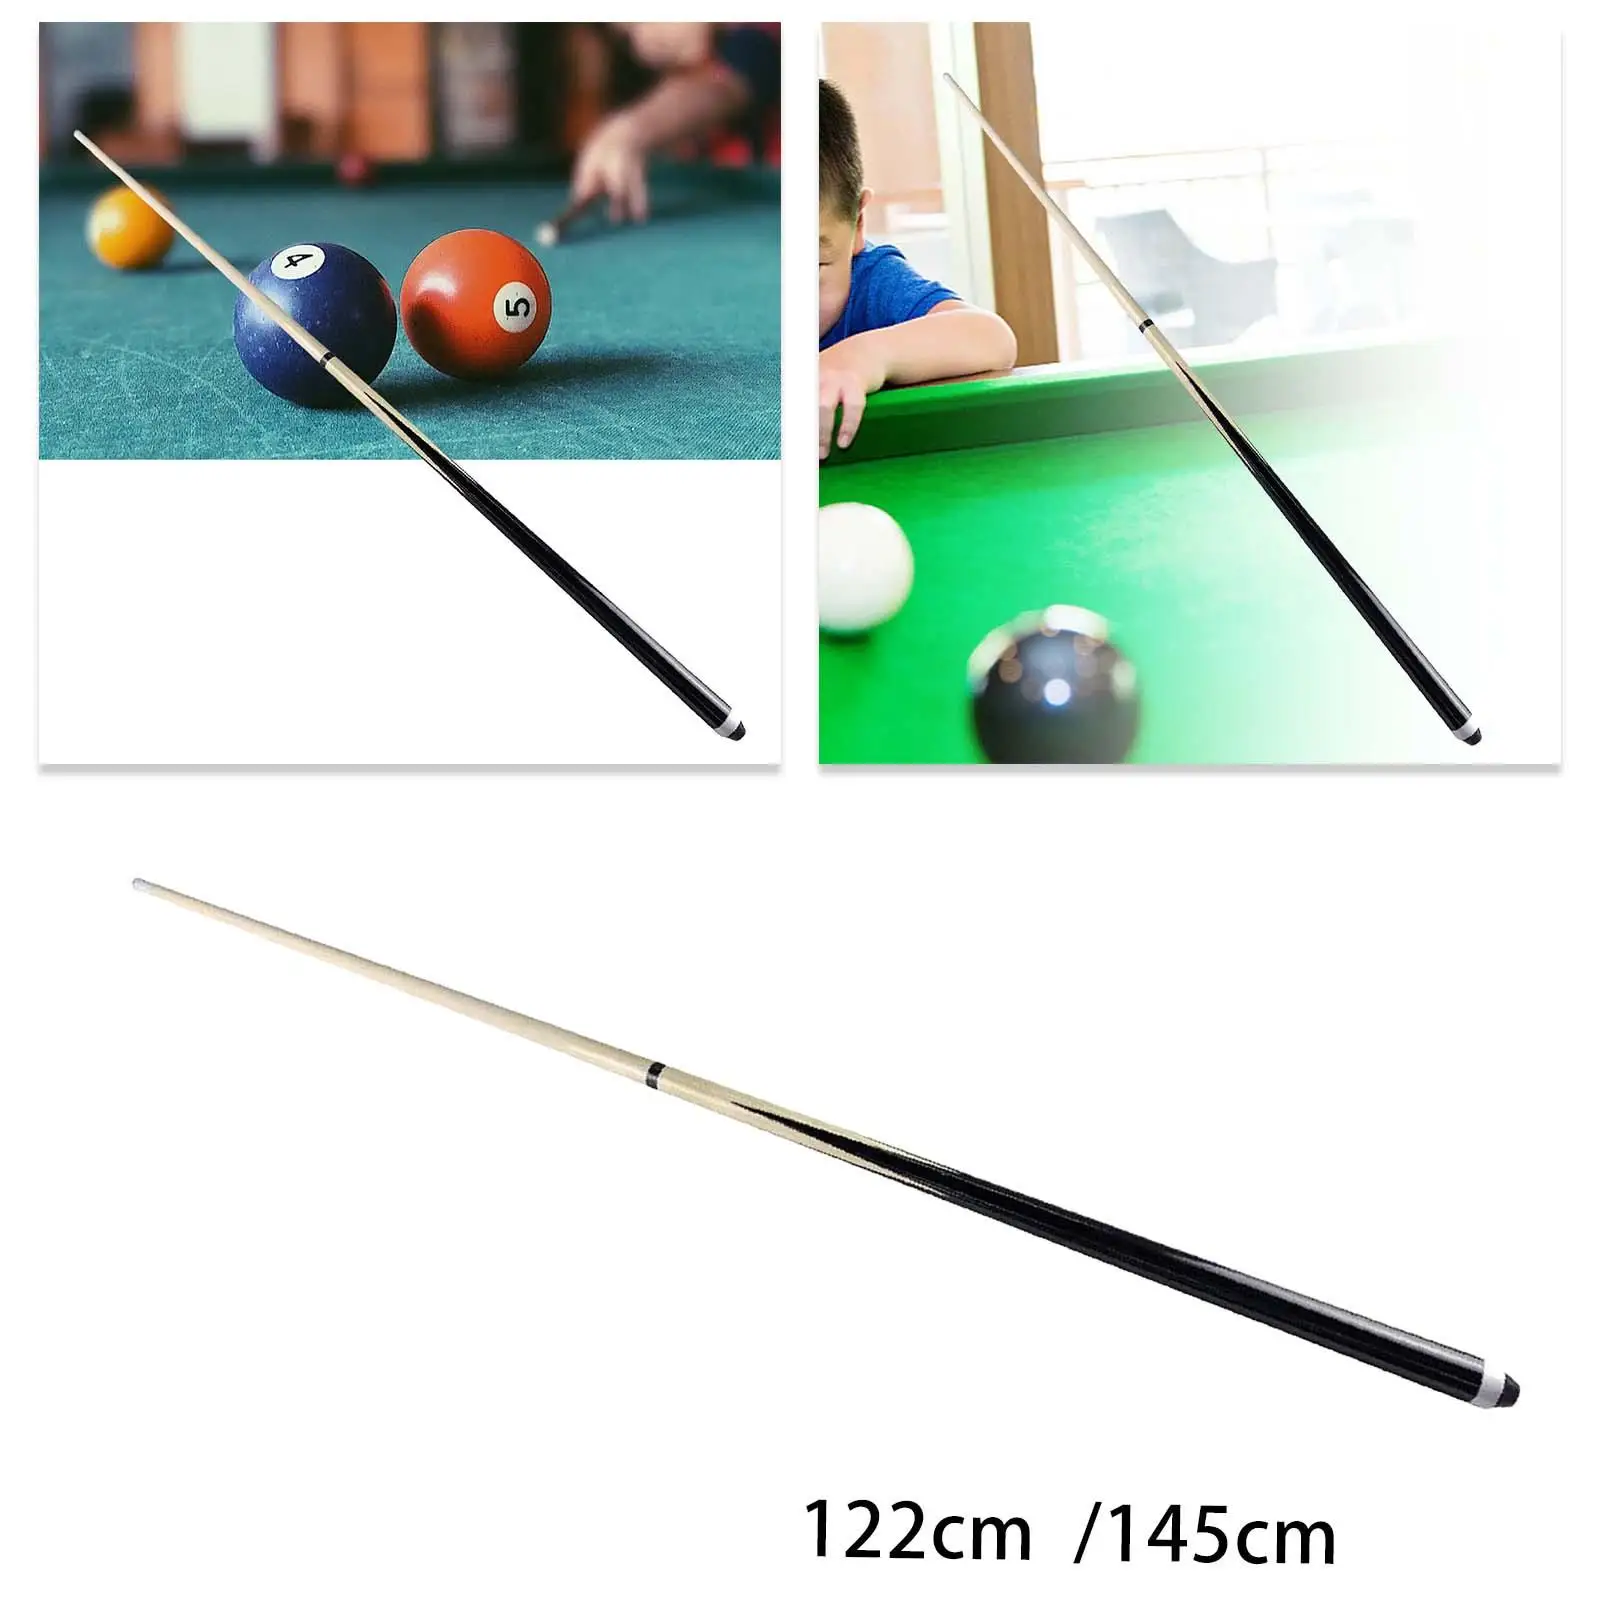 Kids Pool Cue Portable House Wood Billiard Pool Cue for House Billiards Children